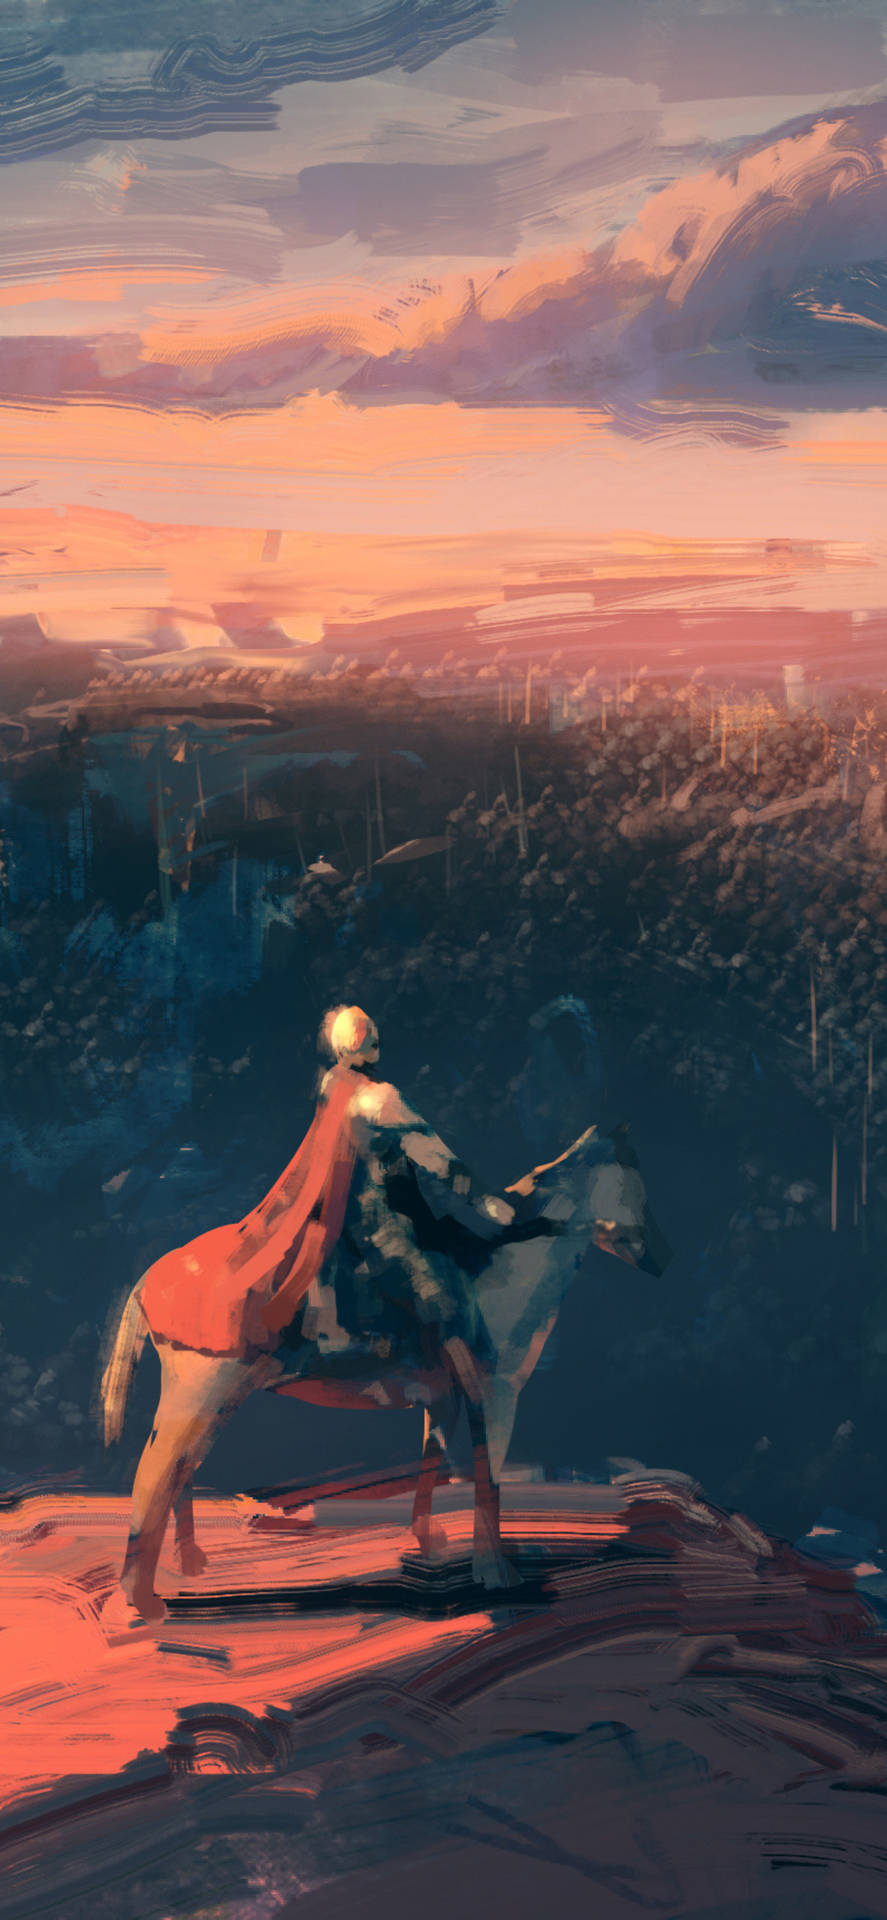 Lead Warrior On A Horse Wallpaper